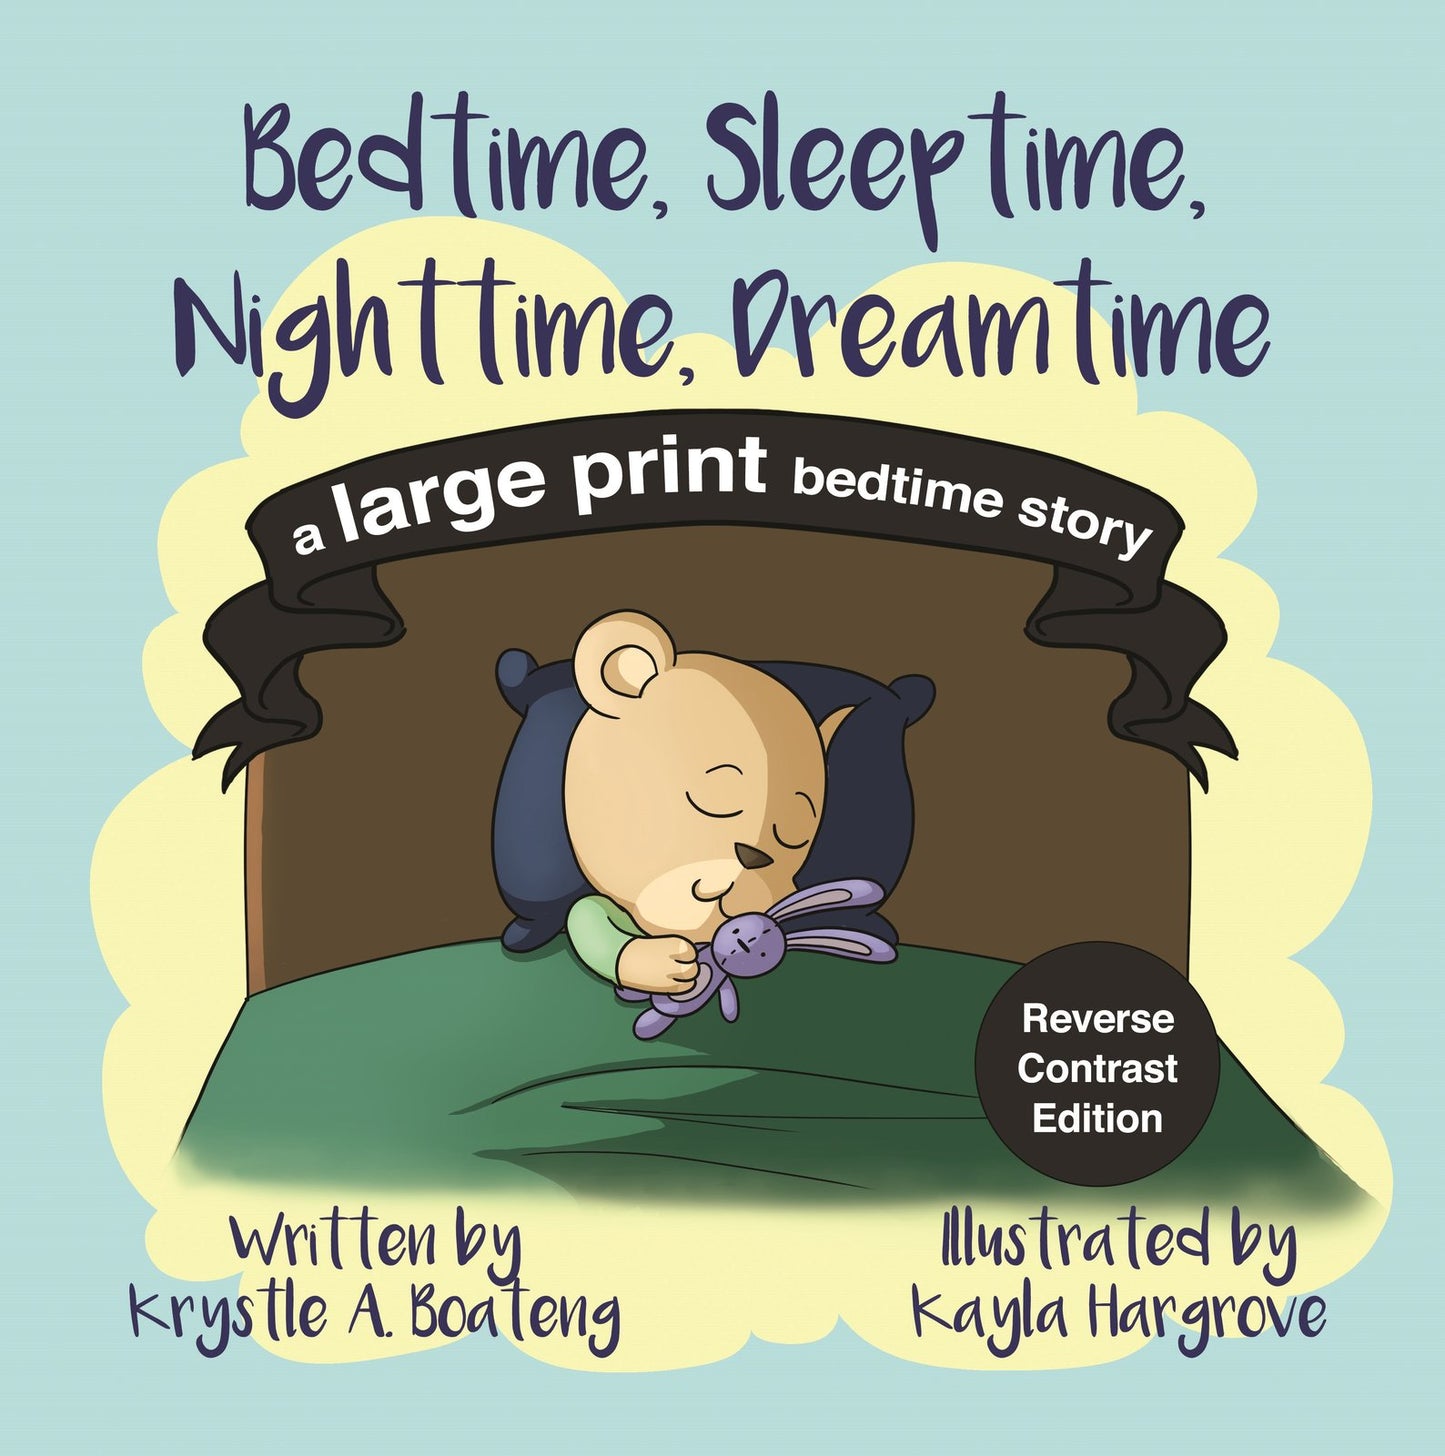 Bedtime Sleep time Nighttime Dream time is a sweet bedtime story that encourages routine keeping, gratitude, imagination and aspiration! Large Print, Reverse Contrast